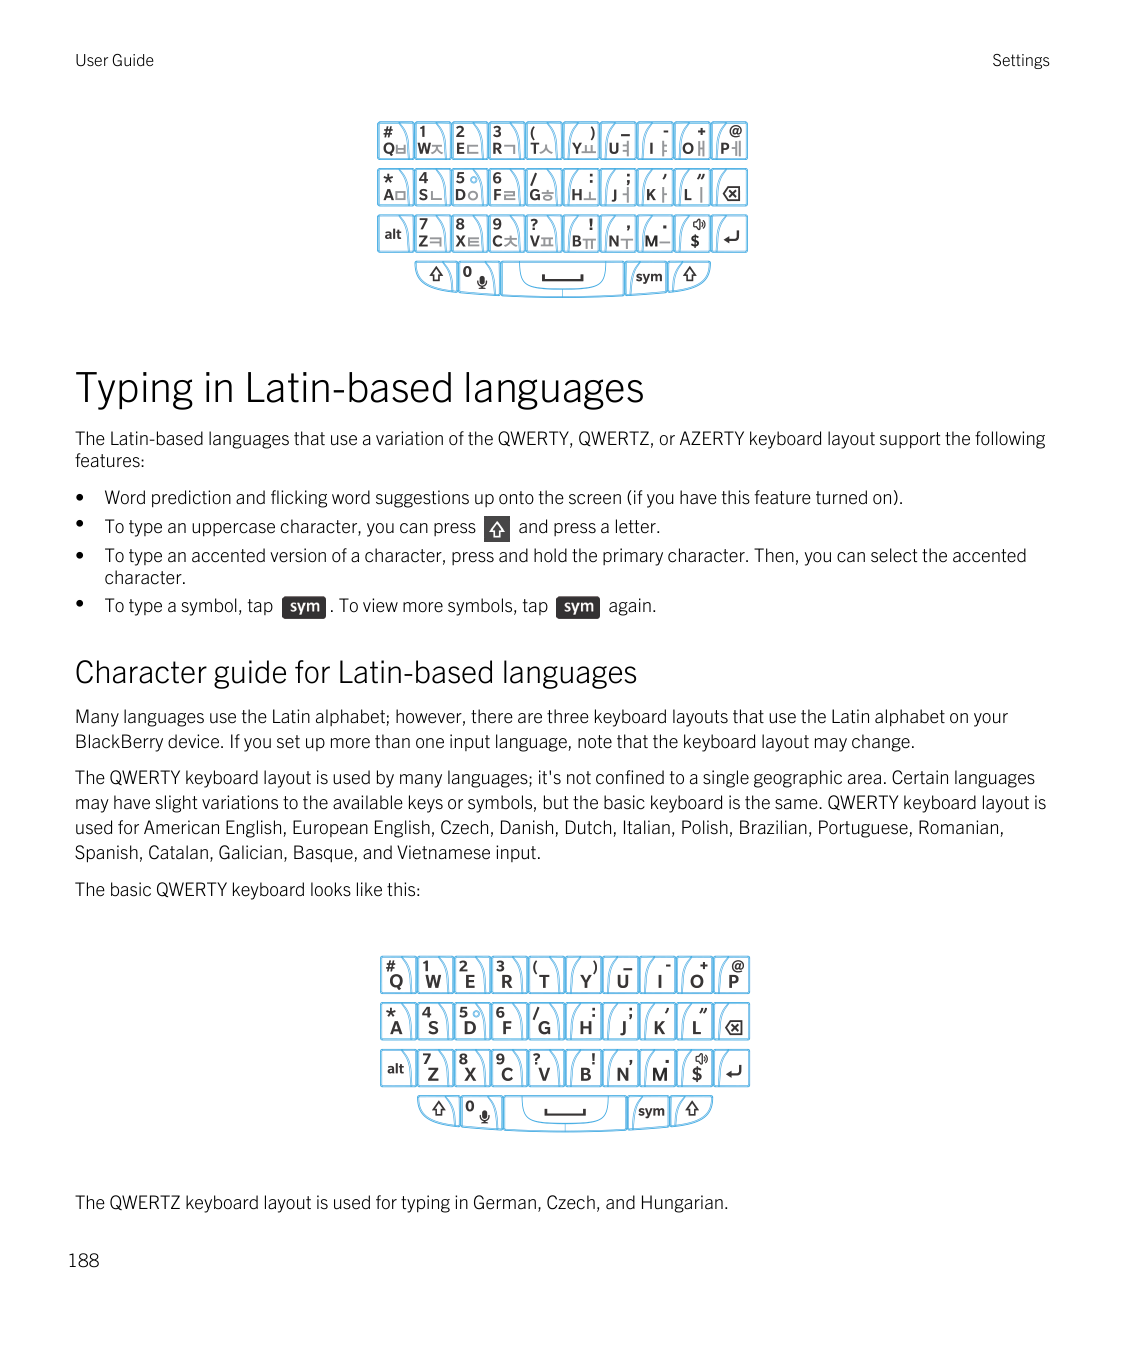 User GuideSettingsTyping in Latin-based languagesThe Latin-based languages that use a variation of the QWERTY, QWERTZ, or AZERTY